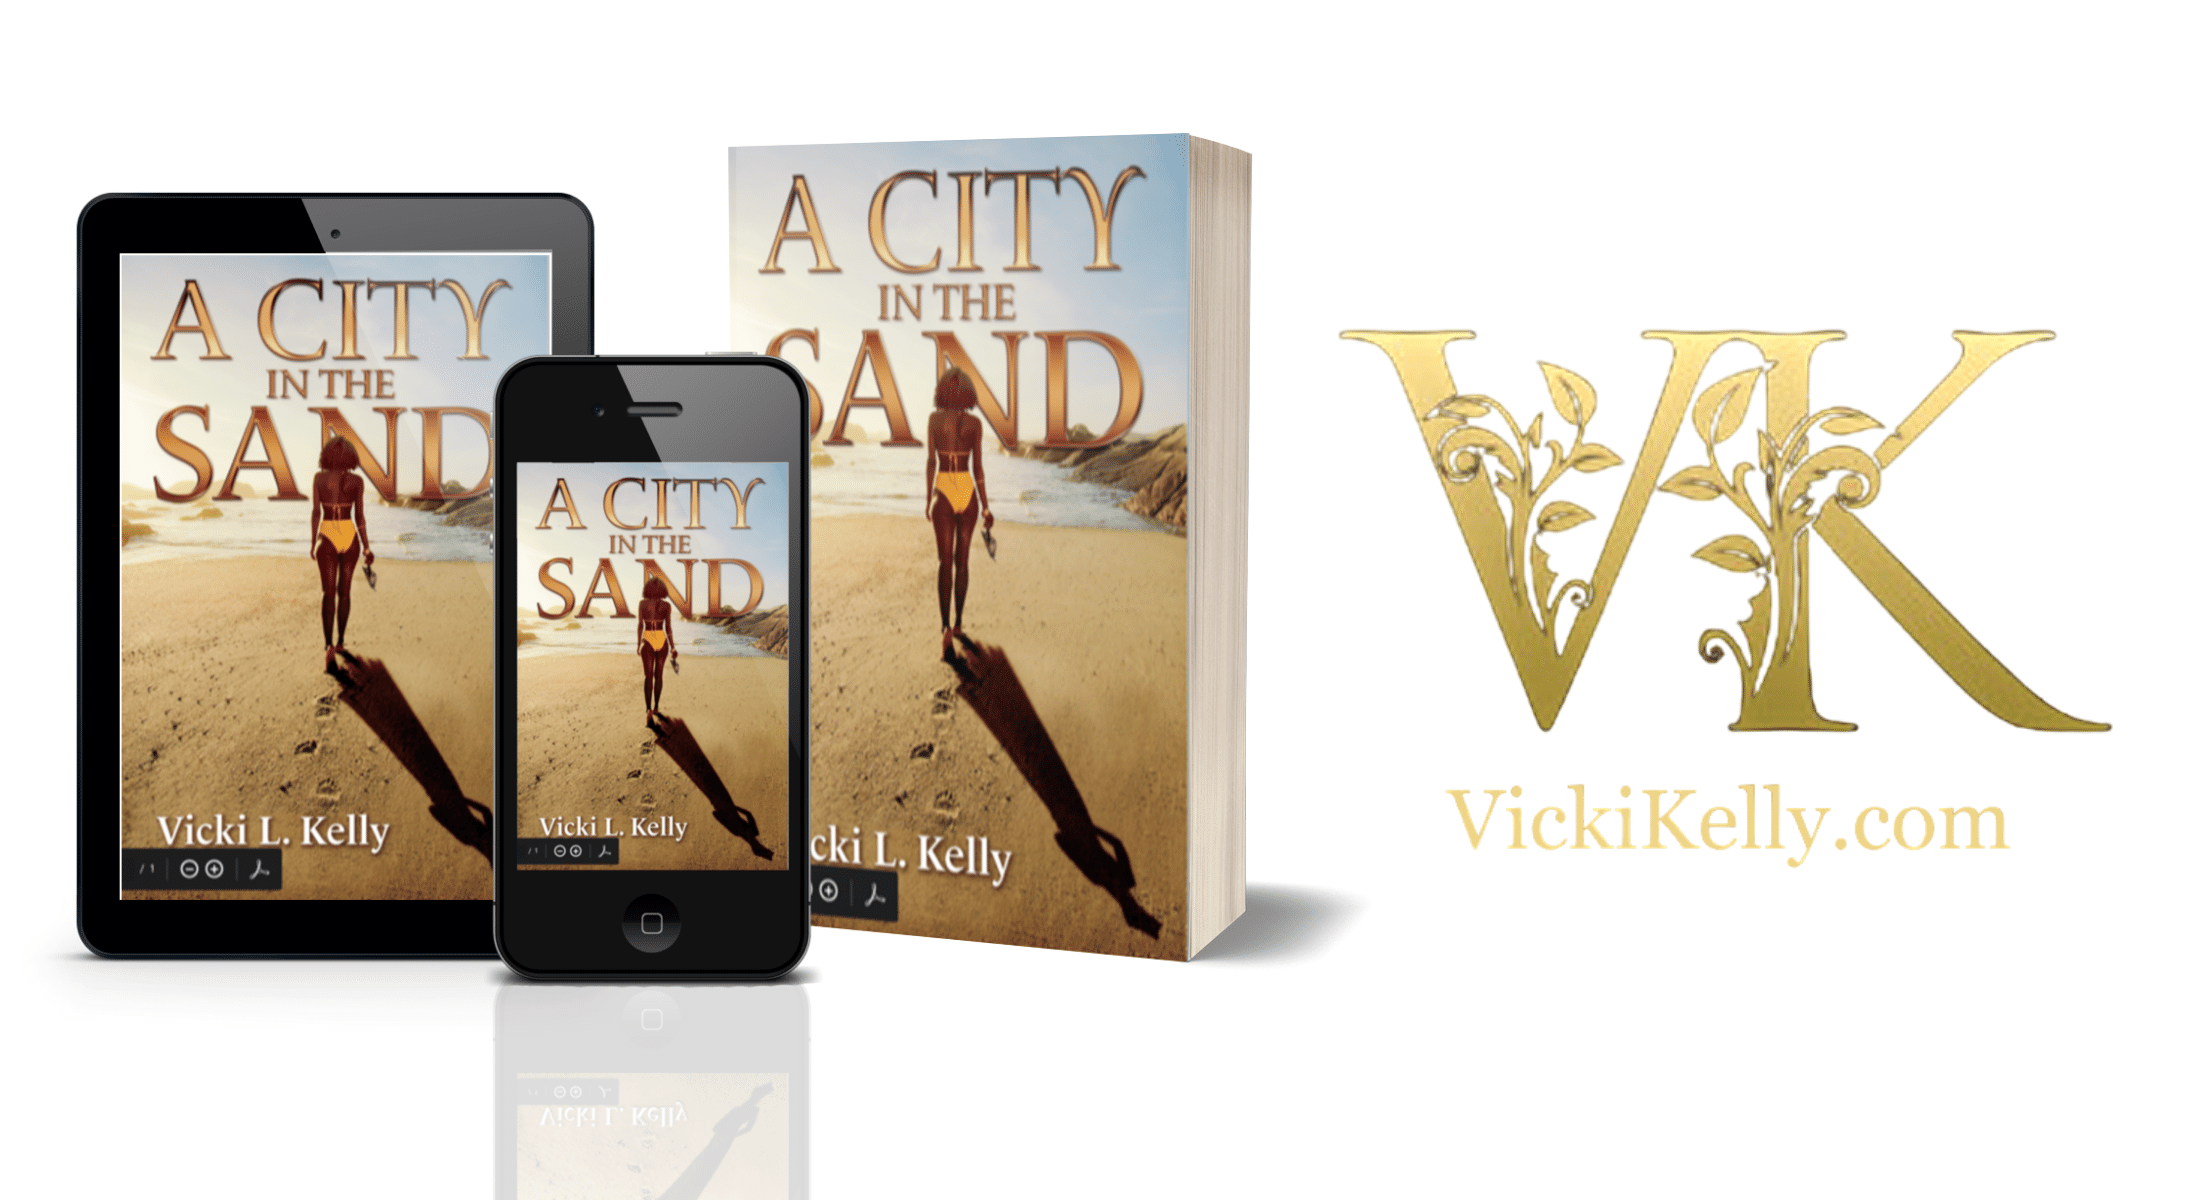 Author Vicki Kelly on her new book A City In The Sand